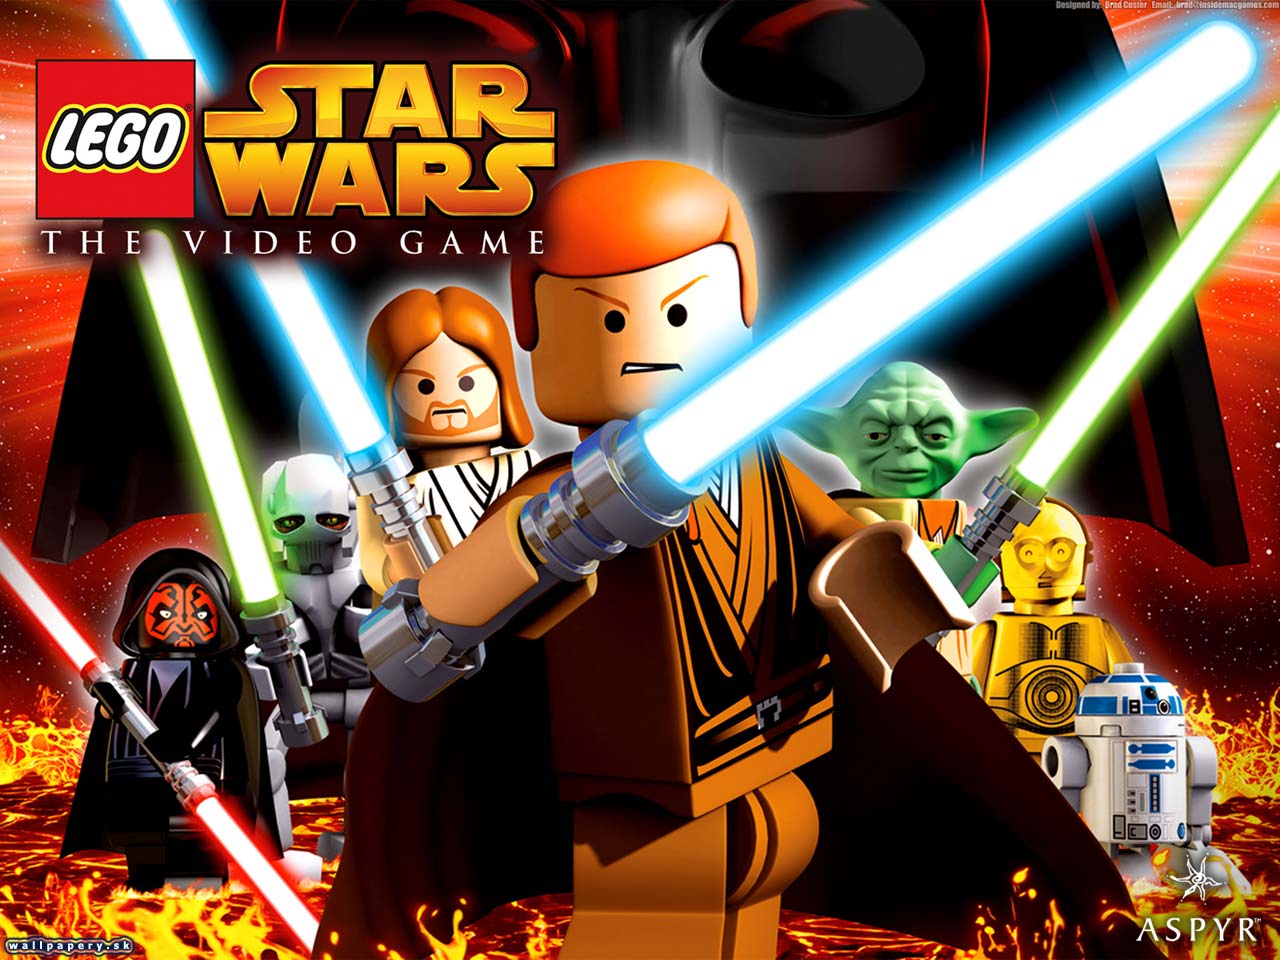 LEGO Star Wars: The Video Game - wallpaper 3